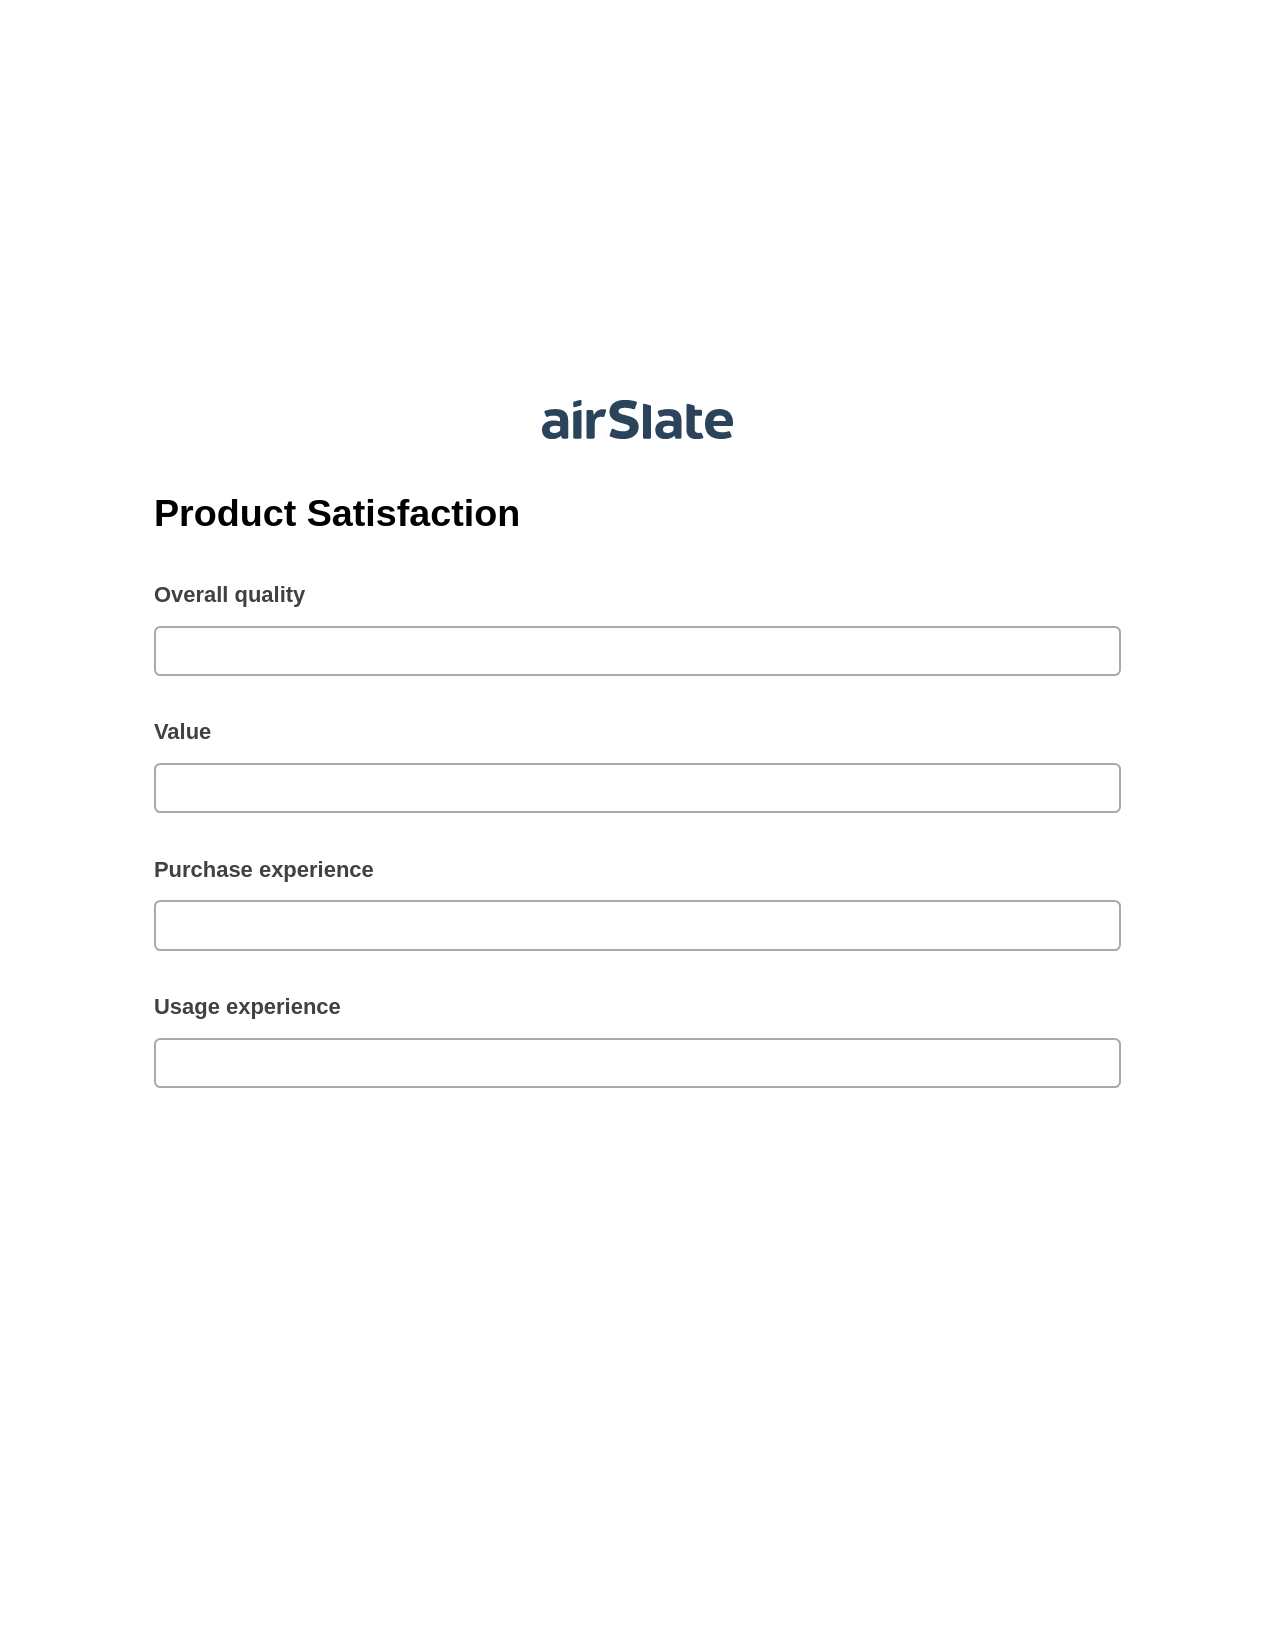 Product Satisfaction Pre-fill from Excel Spreadsheet Bot, Slack Notification Bot, Box Bot